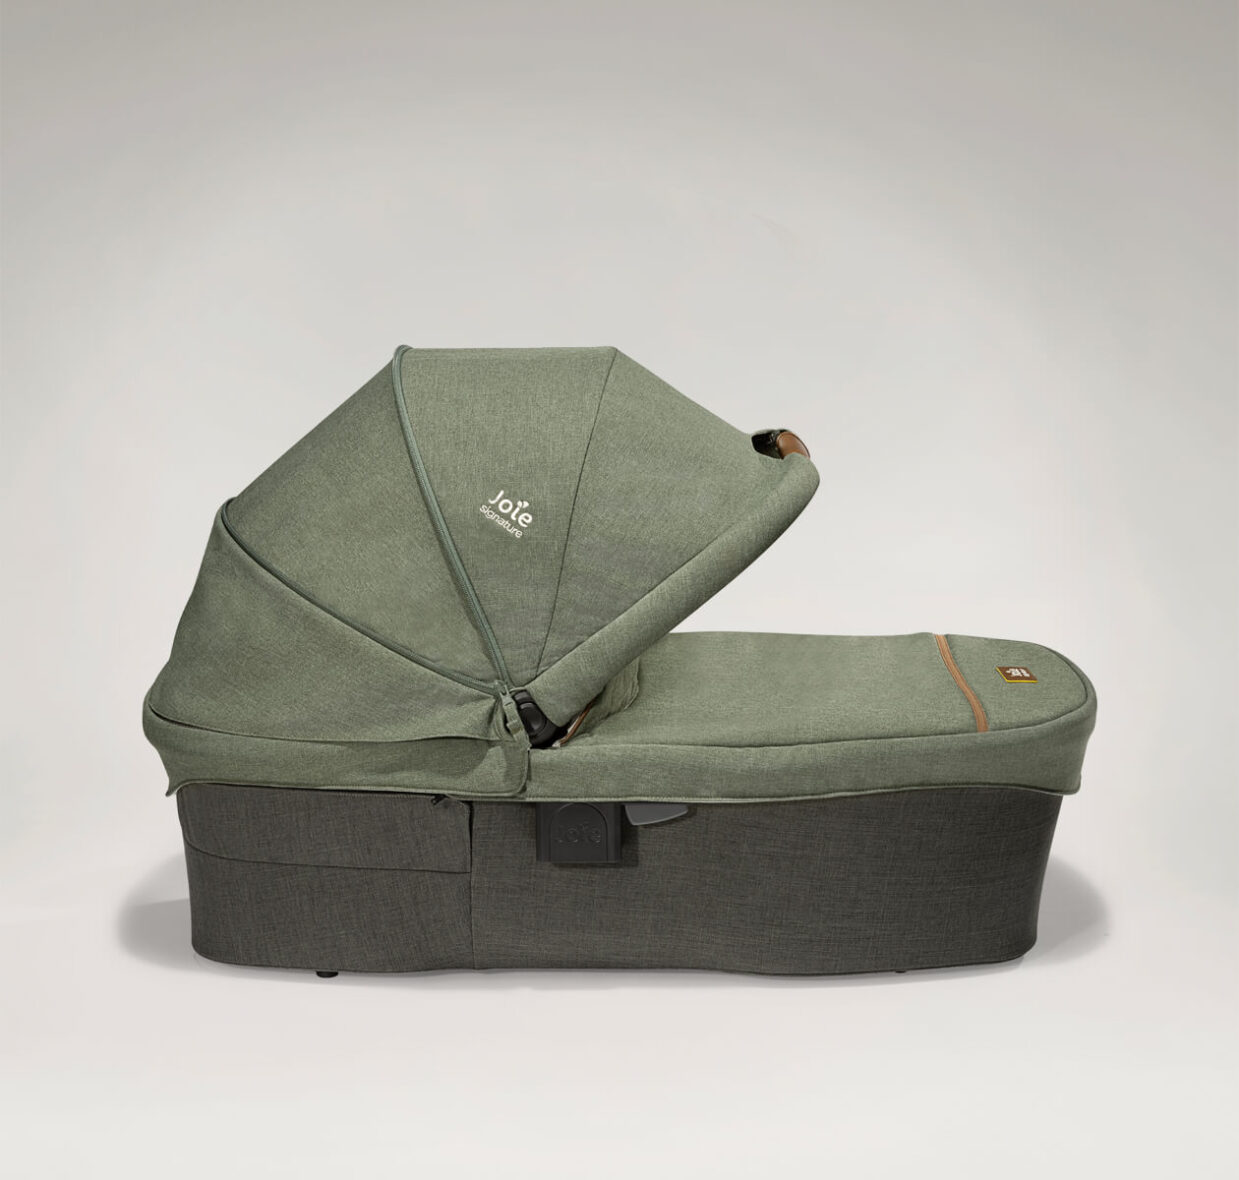 p3-joie-signature-carrycot-ramblexl-pine-right-profile-canopy-extended